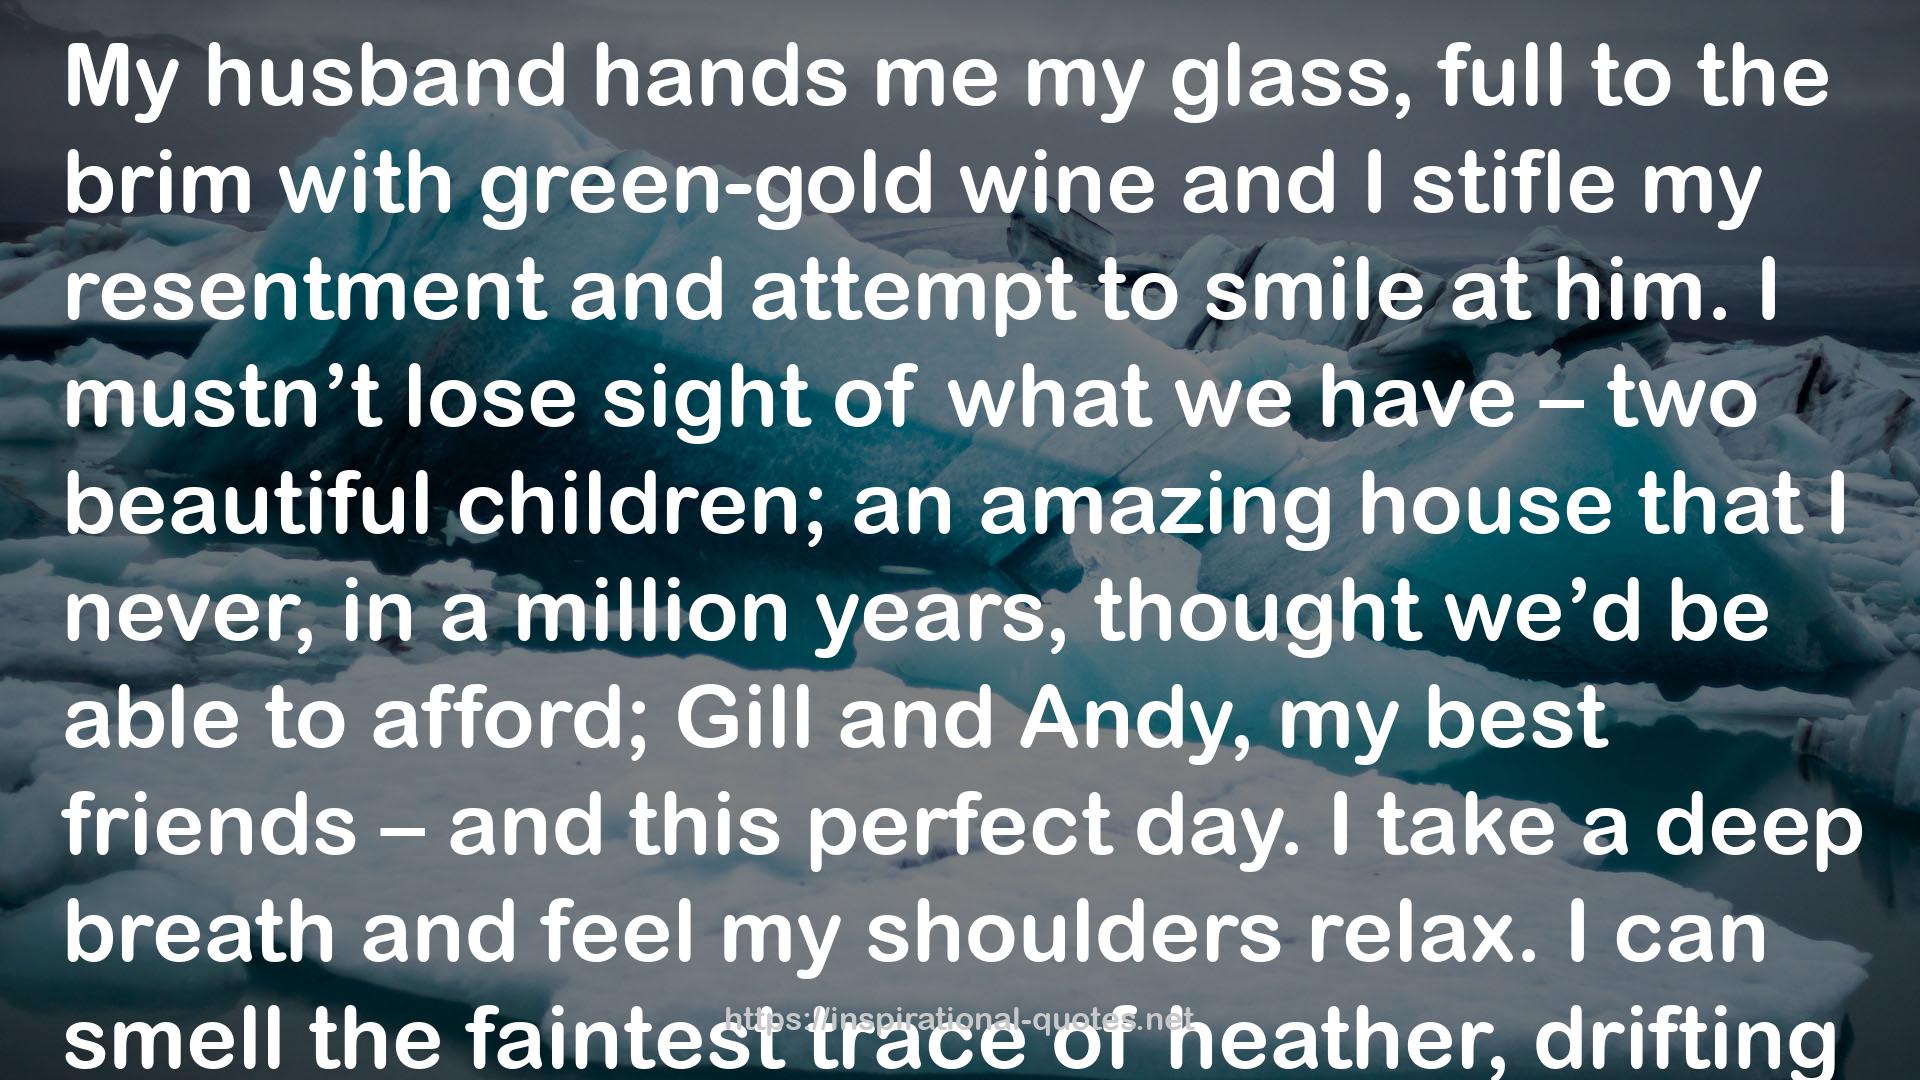 green-gold wine  QUOTES